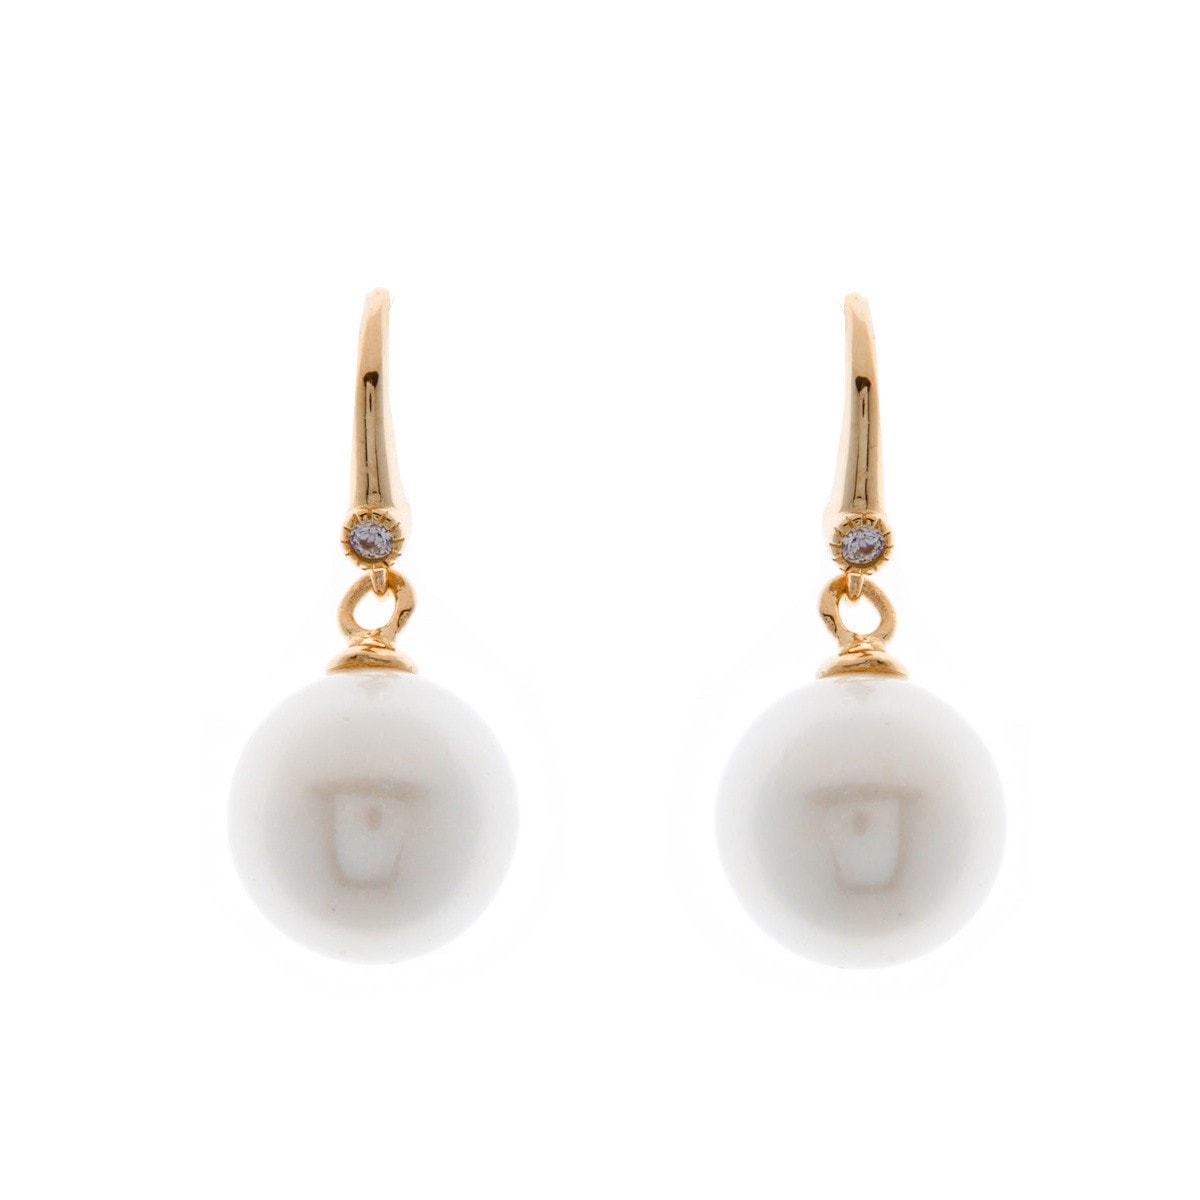 Sybella Earrings SYBELLA EARRING WHITE PEARL AND YELLOW GOLD EARRINGS